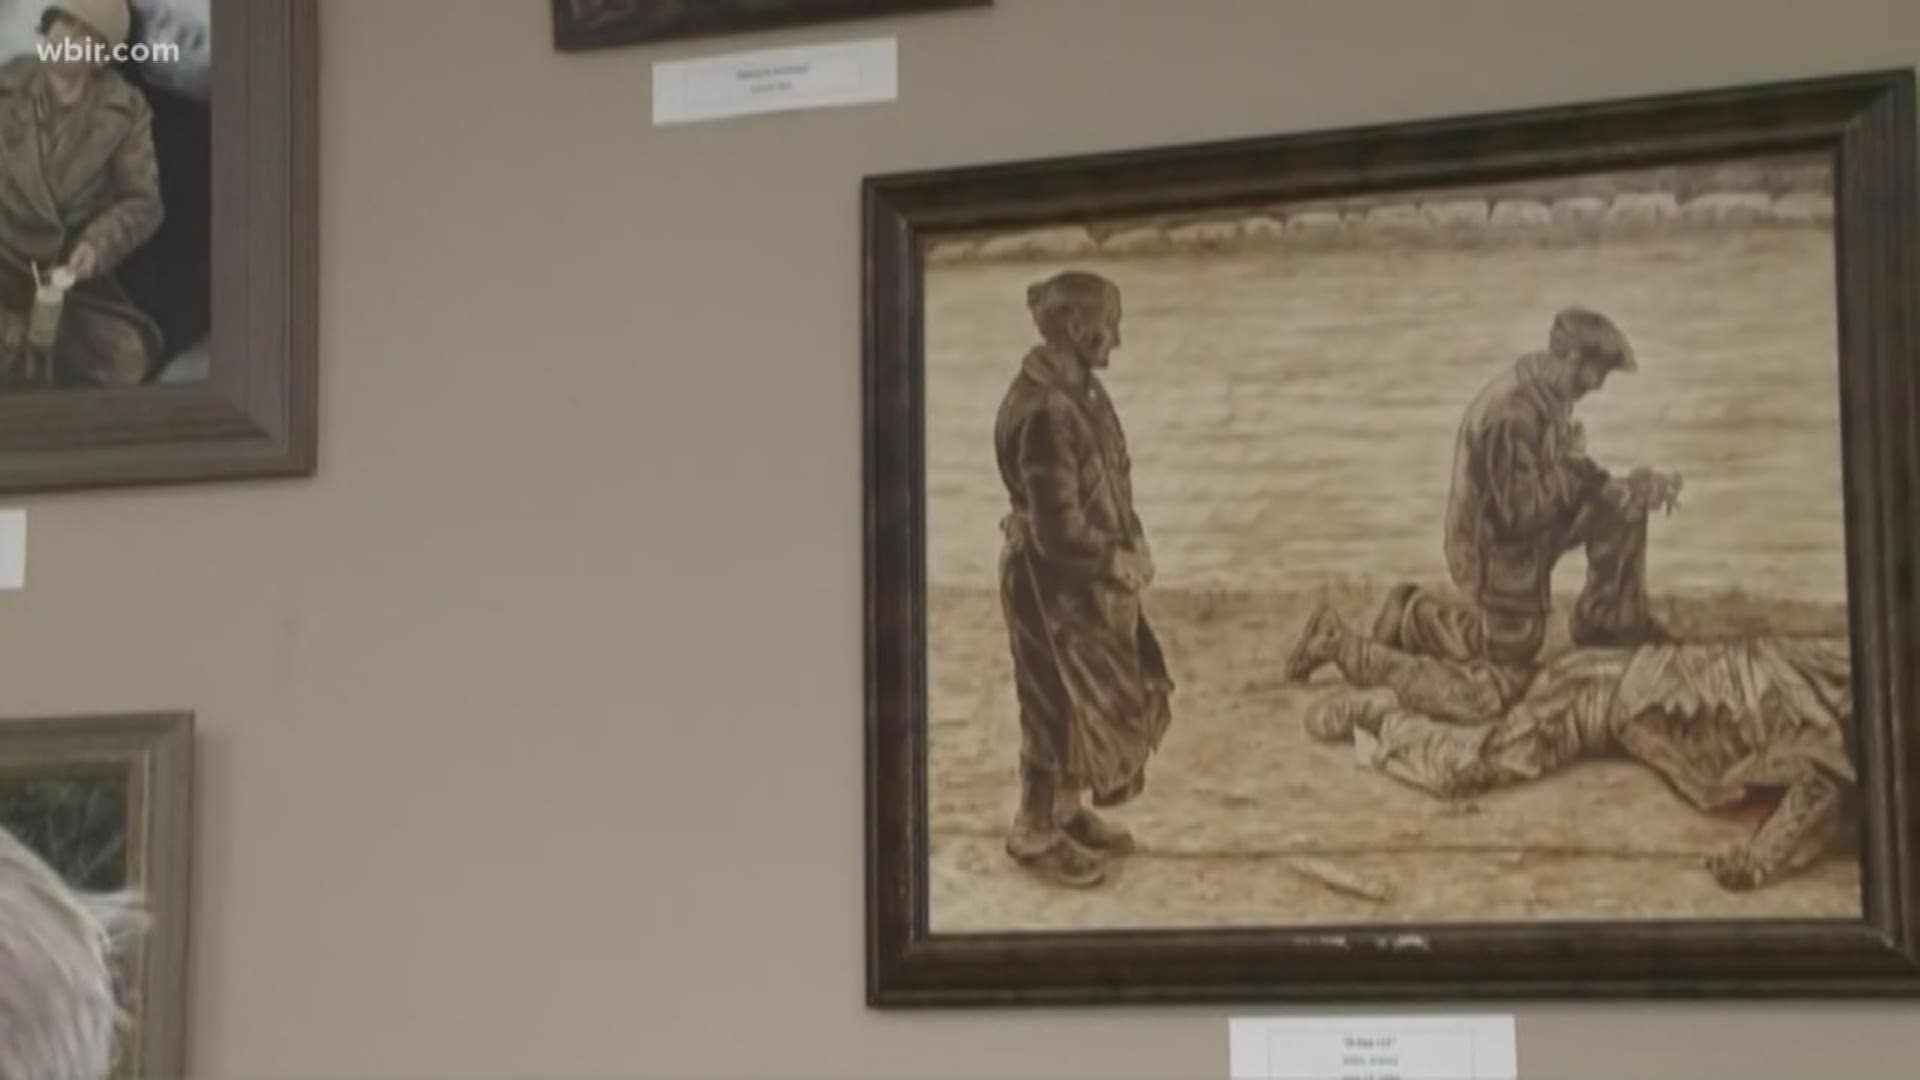 There is a new exhibit at the Farragut Museum honoring veterans through January.